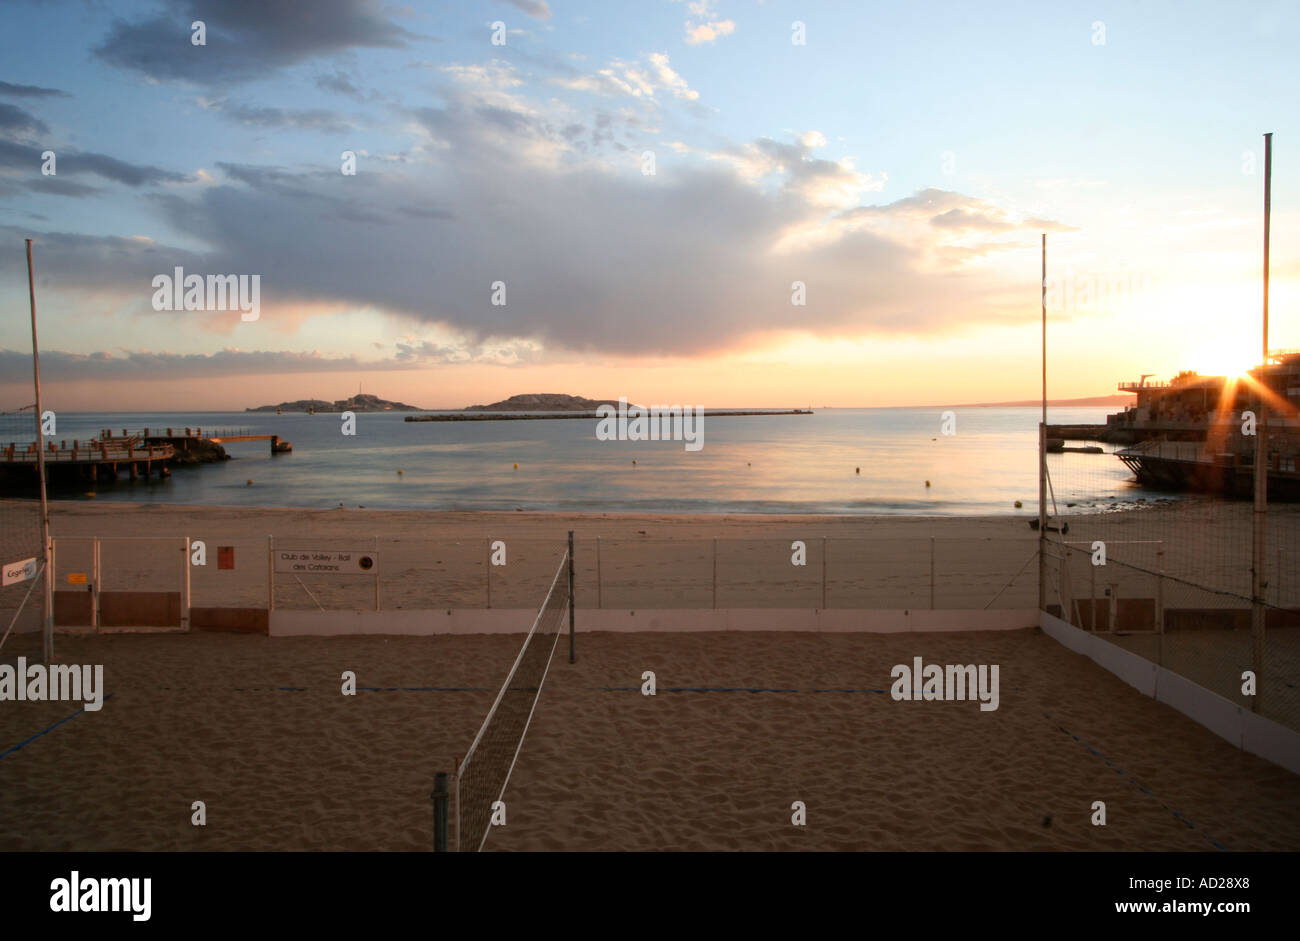 beach in marseille captured with an ND filter to allow for longer exposures in lighter conditions Stock Photo